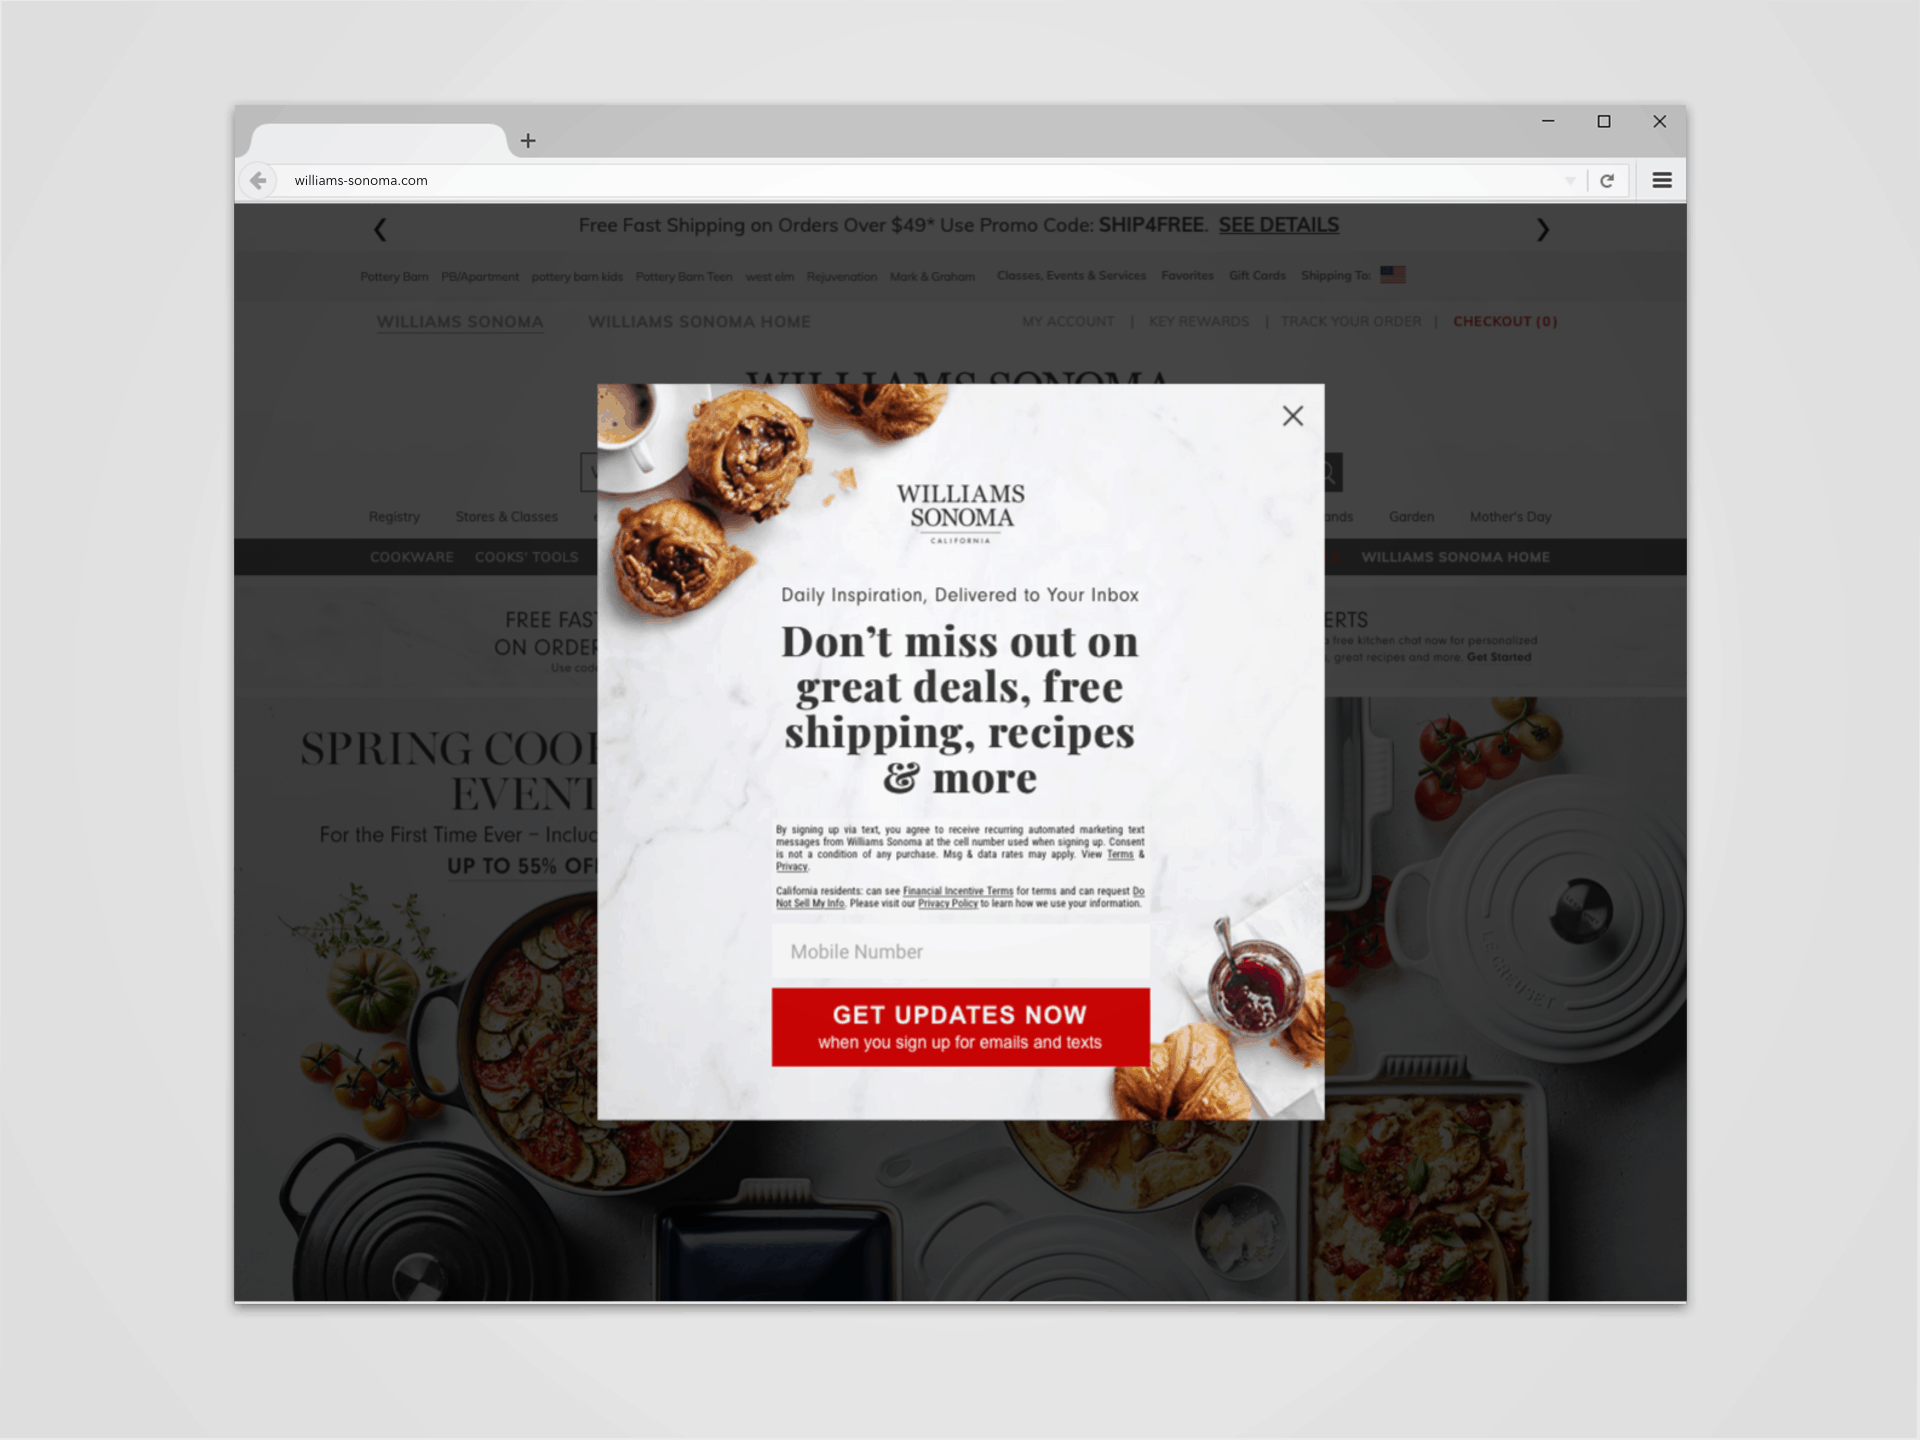 sms marketing pop-up example from williams sonoma